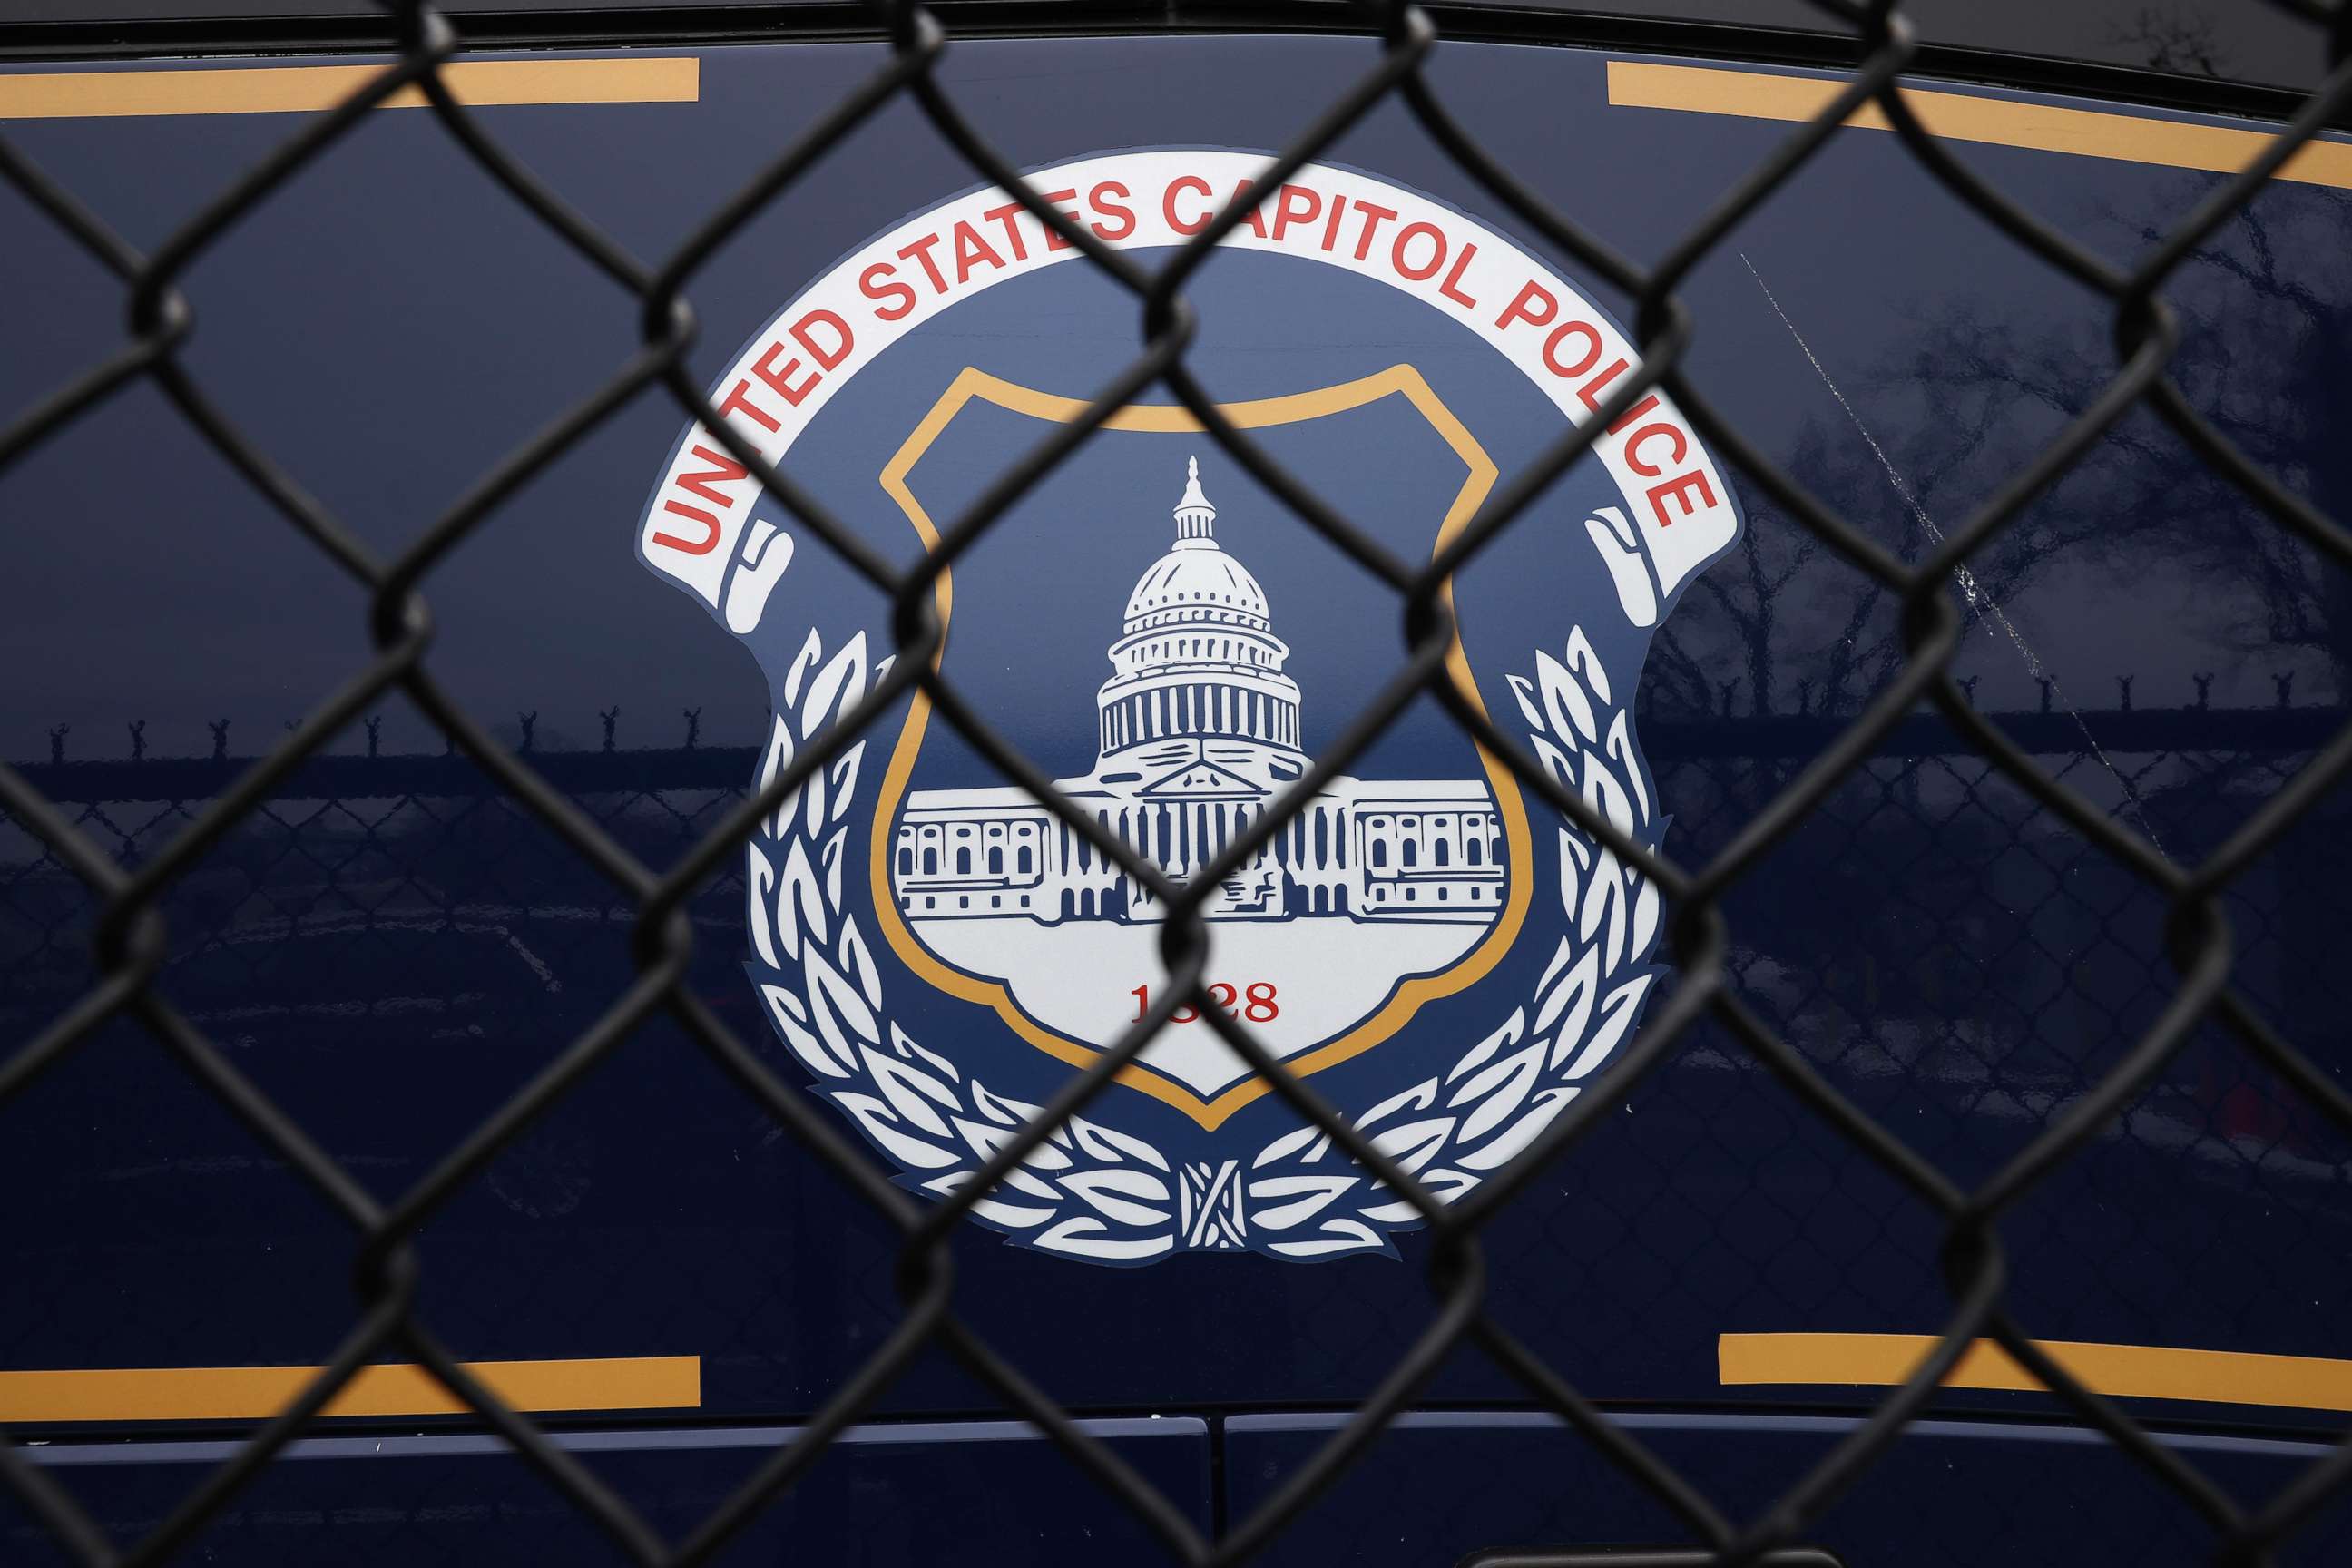 PHOTO: The United States Capitol Police seal appears on the side of a bus parked near the federal law enforcement agency's headquarters in Washington, D.C., on Feb. 19, 2021.